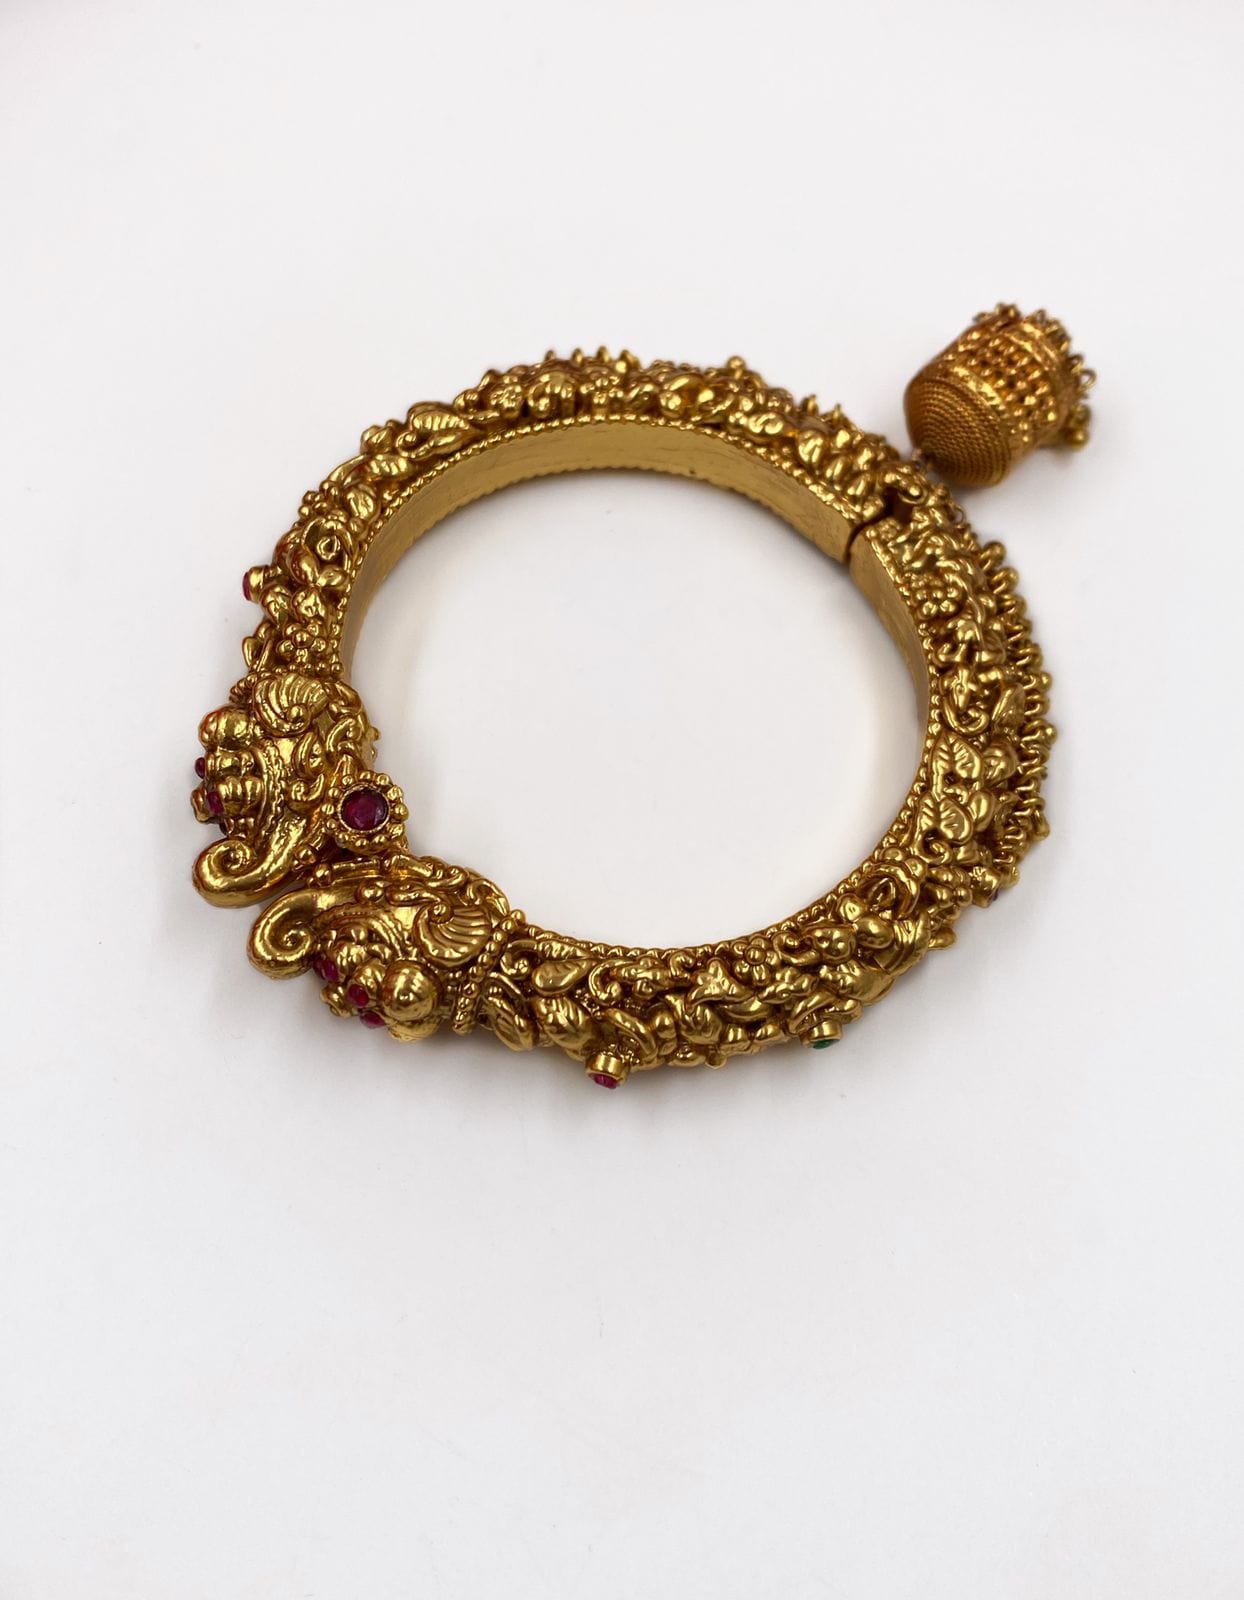 Traditional Gold Plated Antique Golden Kada Bangle For Ladies By Gehna Shop 1pc Antique Golden Bangles